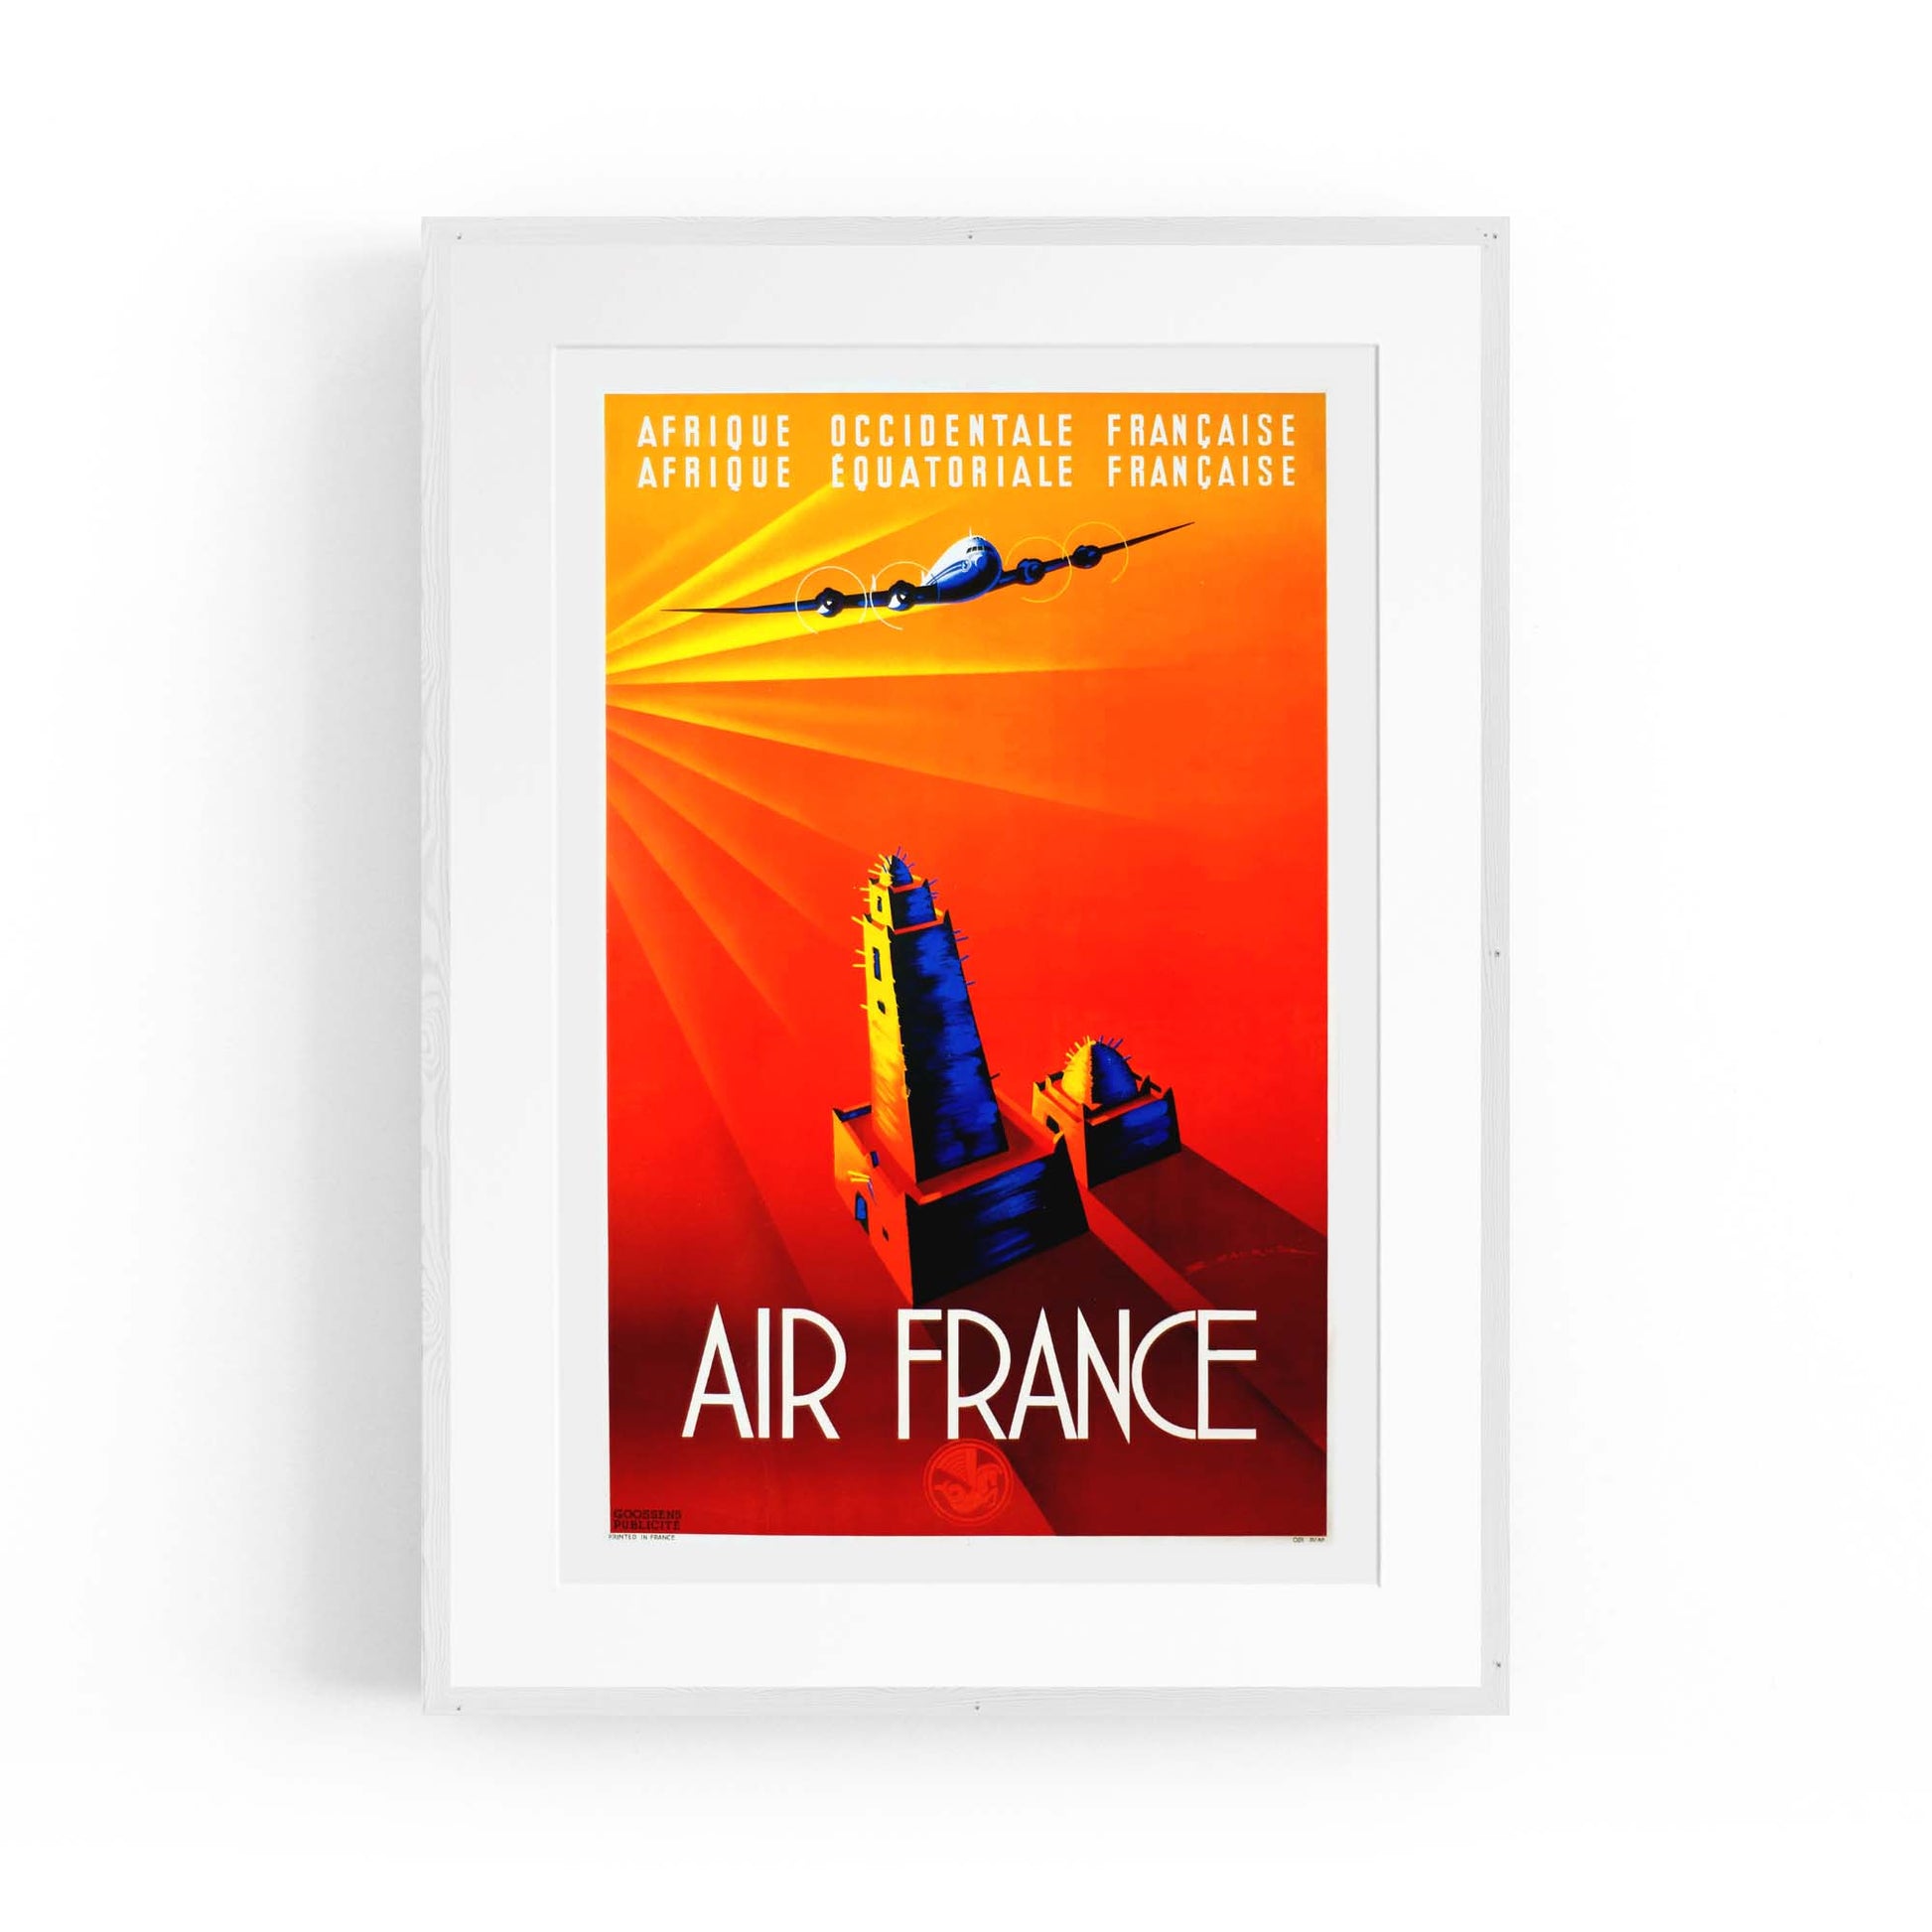 Air France Vintage Travel Advert Airline Wall Art - The Affordable Art Company